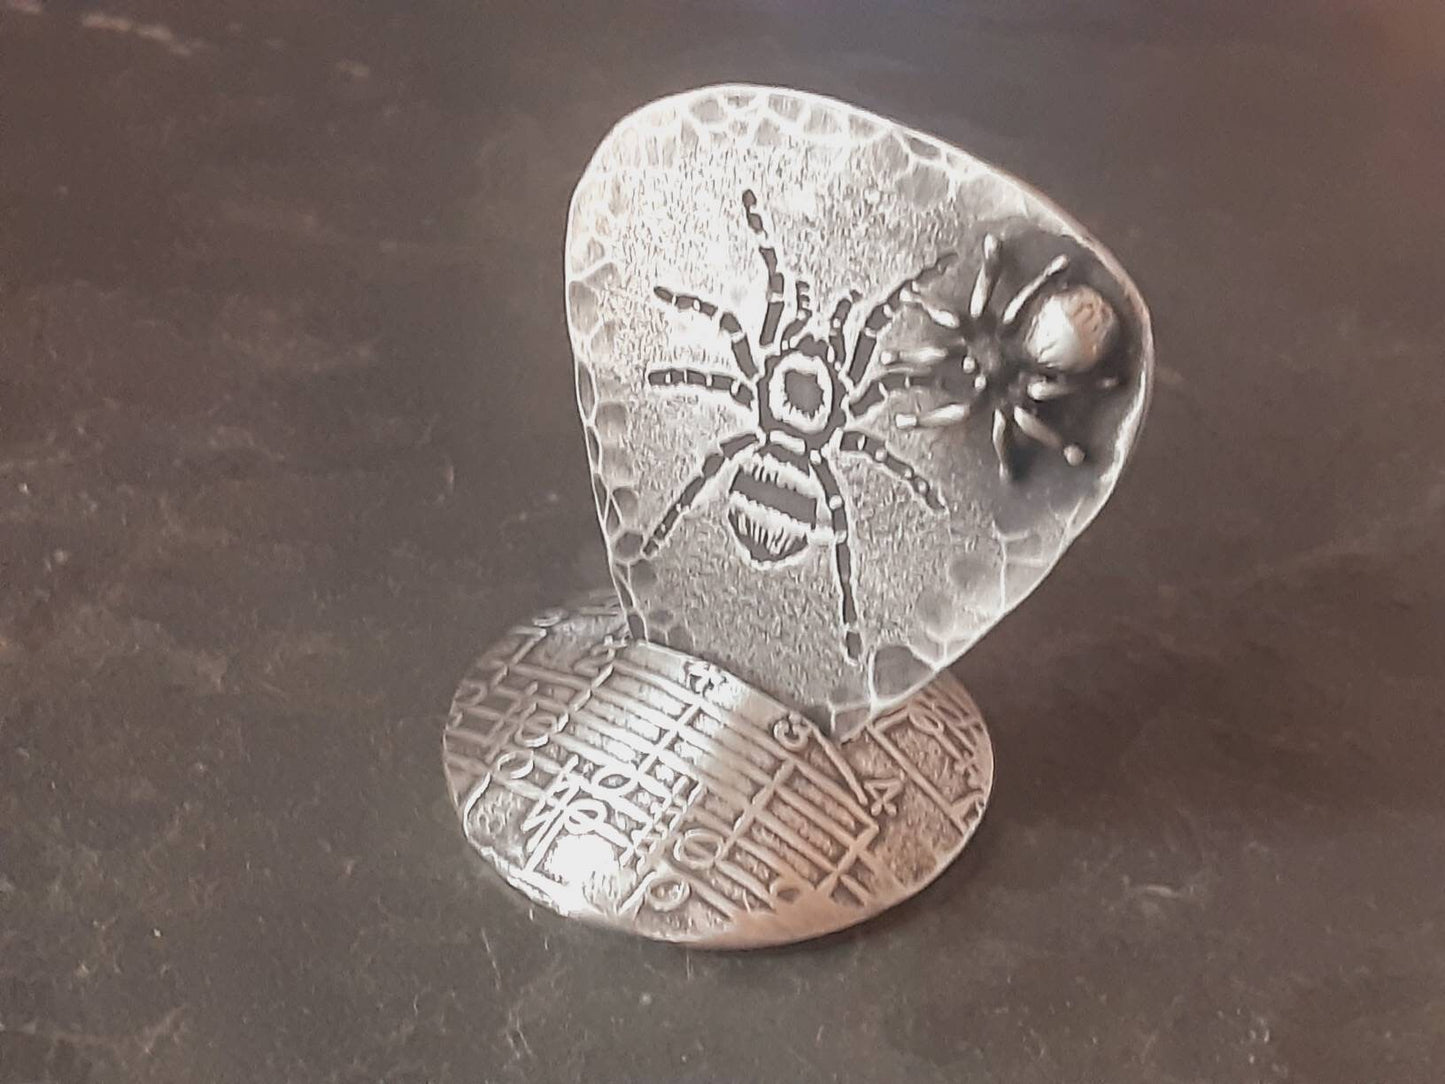 Spider themed sterling silver guitar pick with 3D spider and guitar pick holder stand